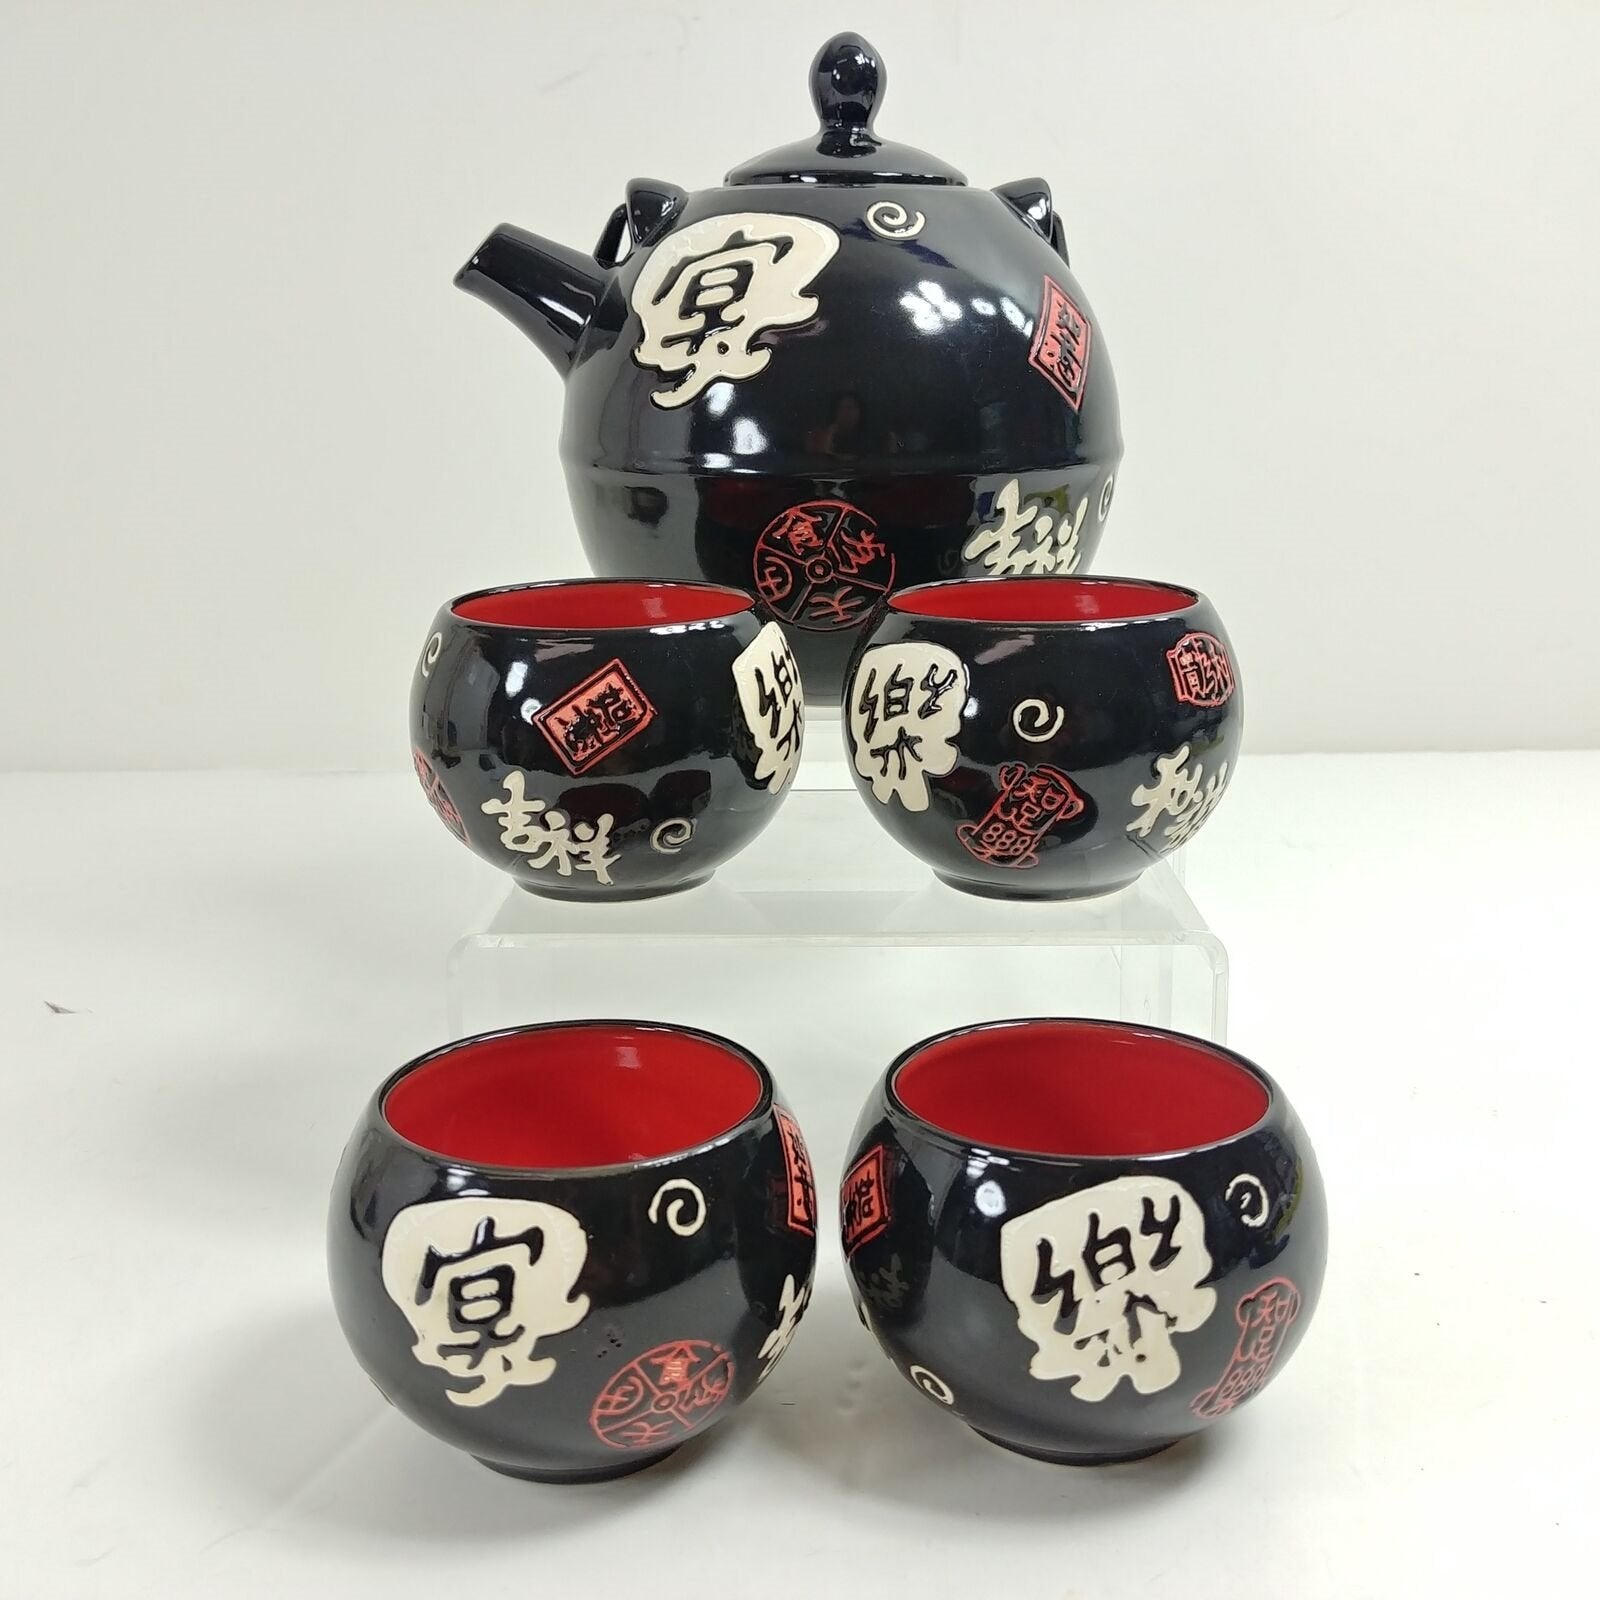 Asian Japanese Tea Pot with Strainer & 4 Sake Cups Embossed Textured 3-d Design